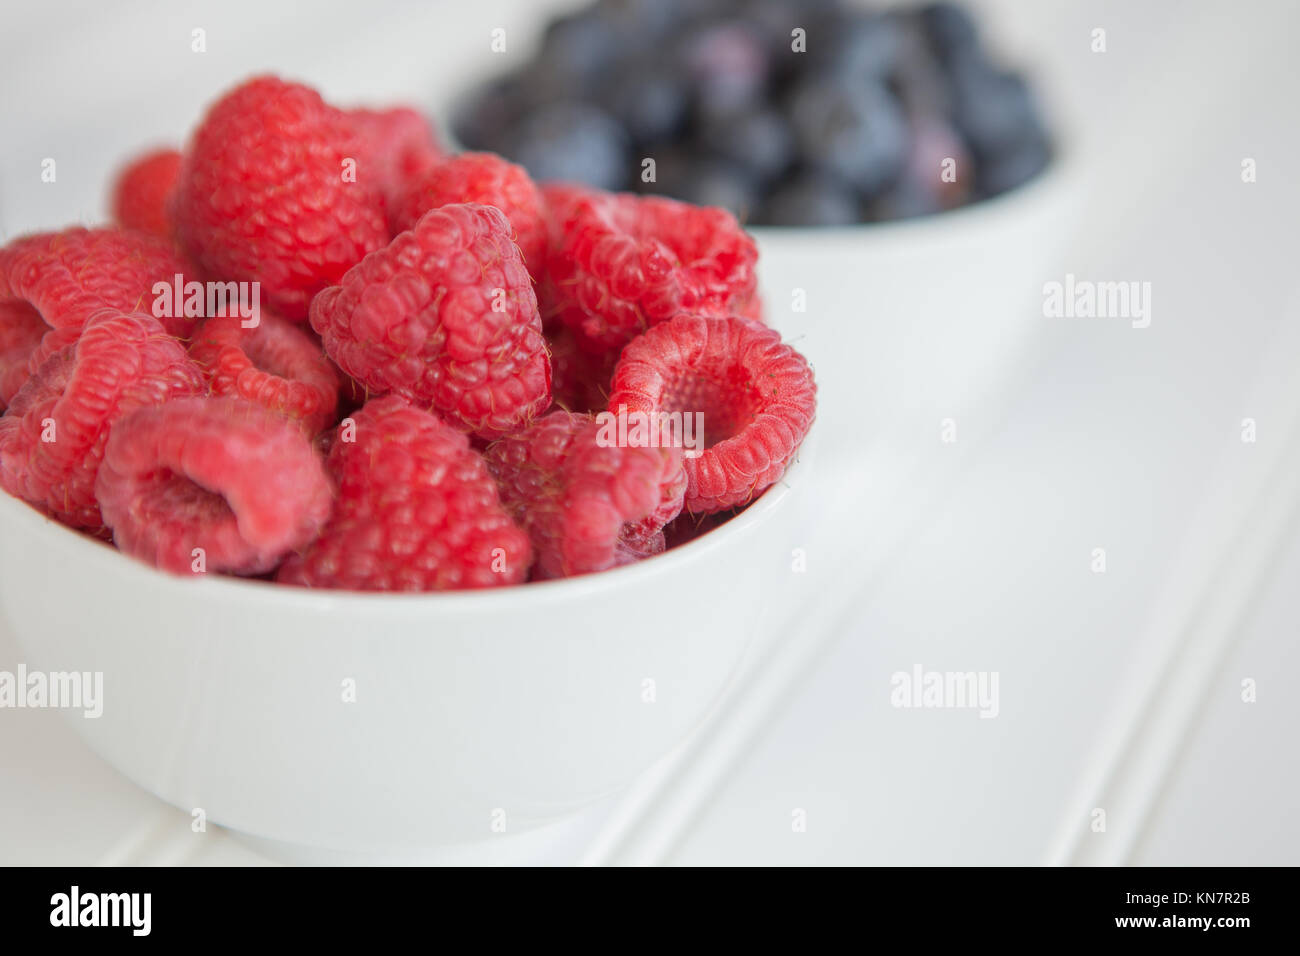 Bowls of blueberries and raspberries Stock Photo